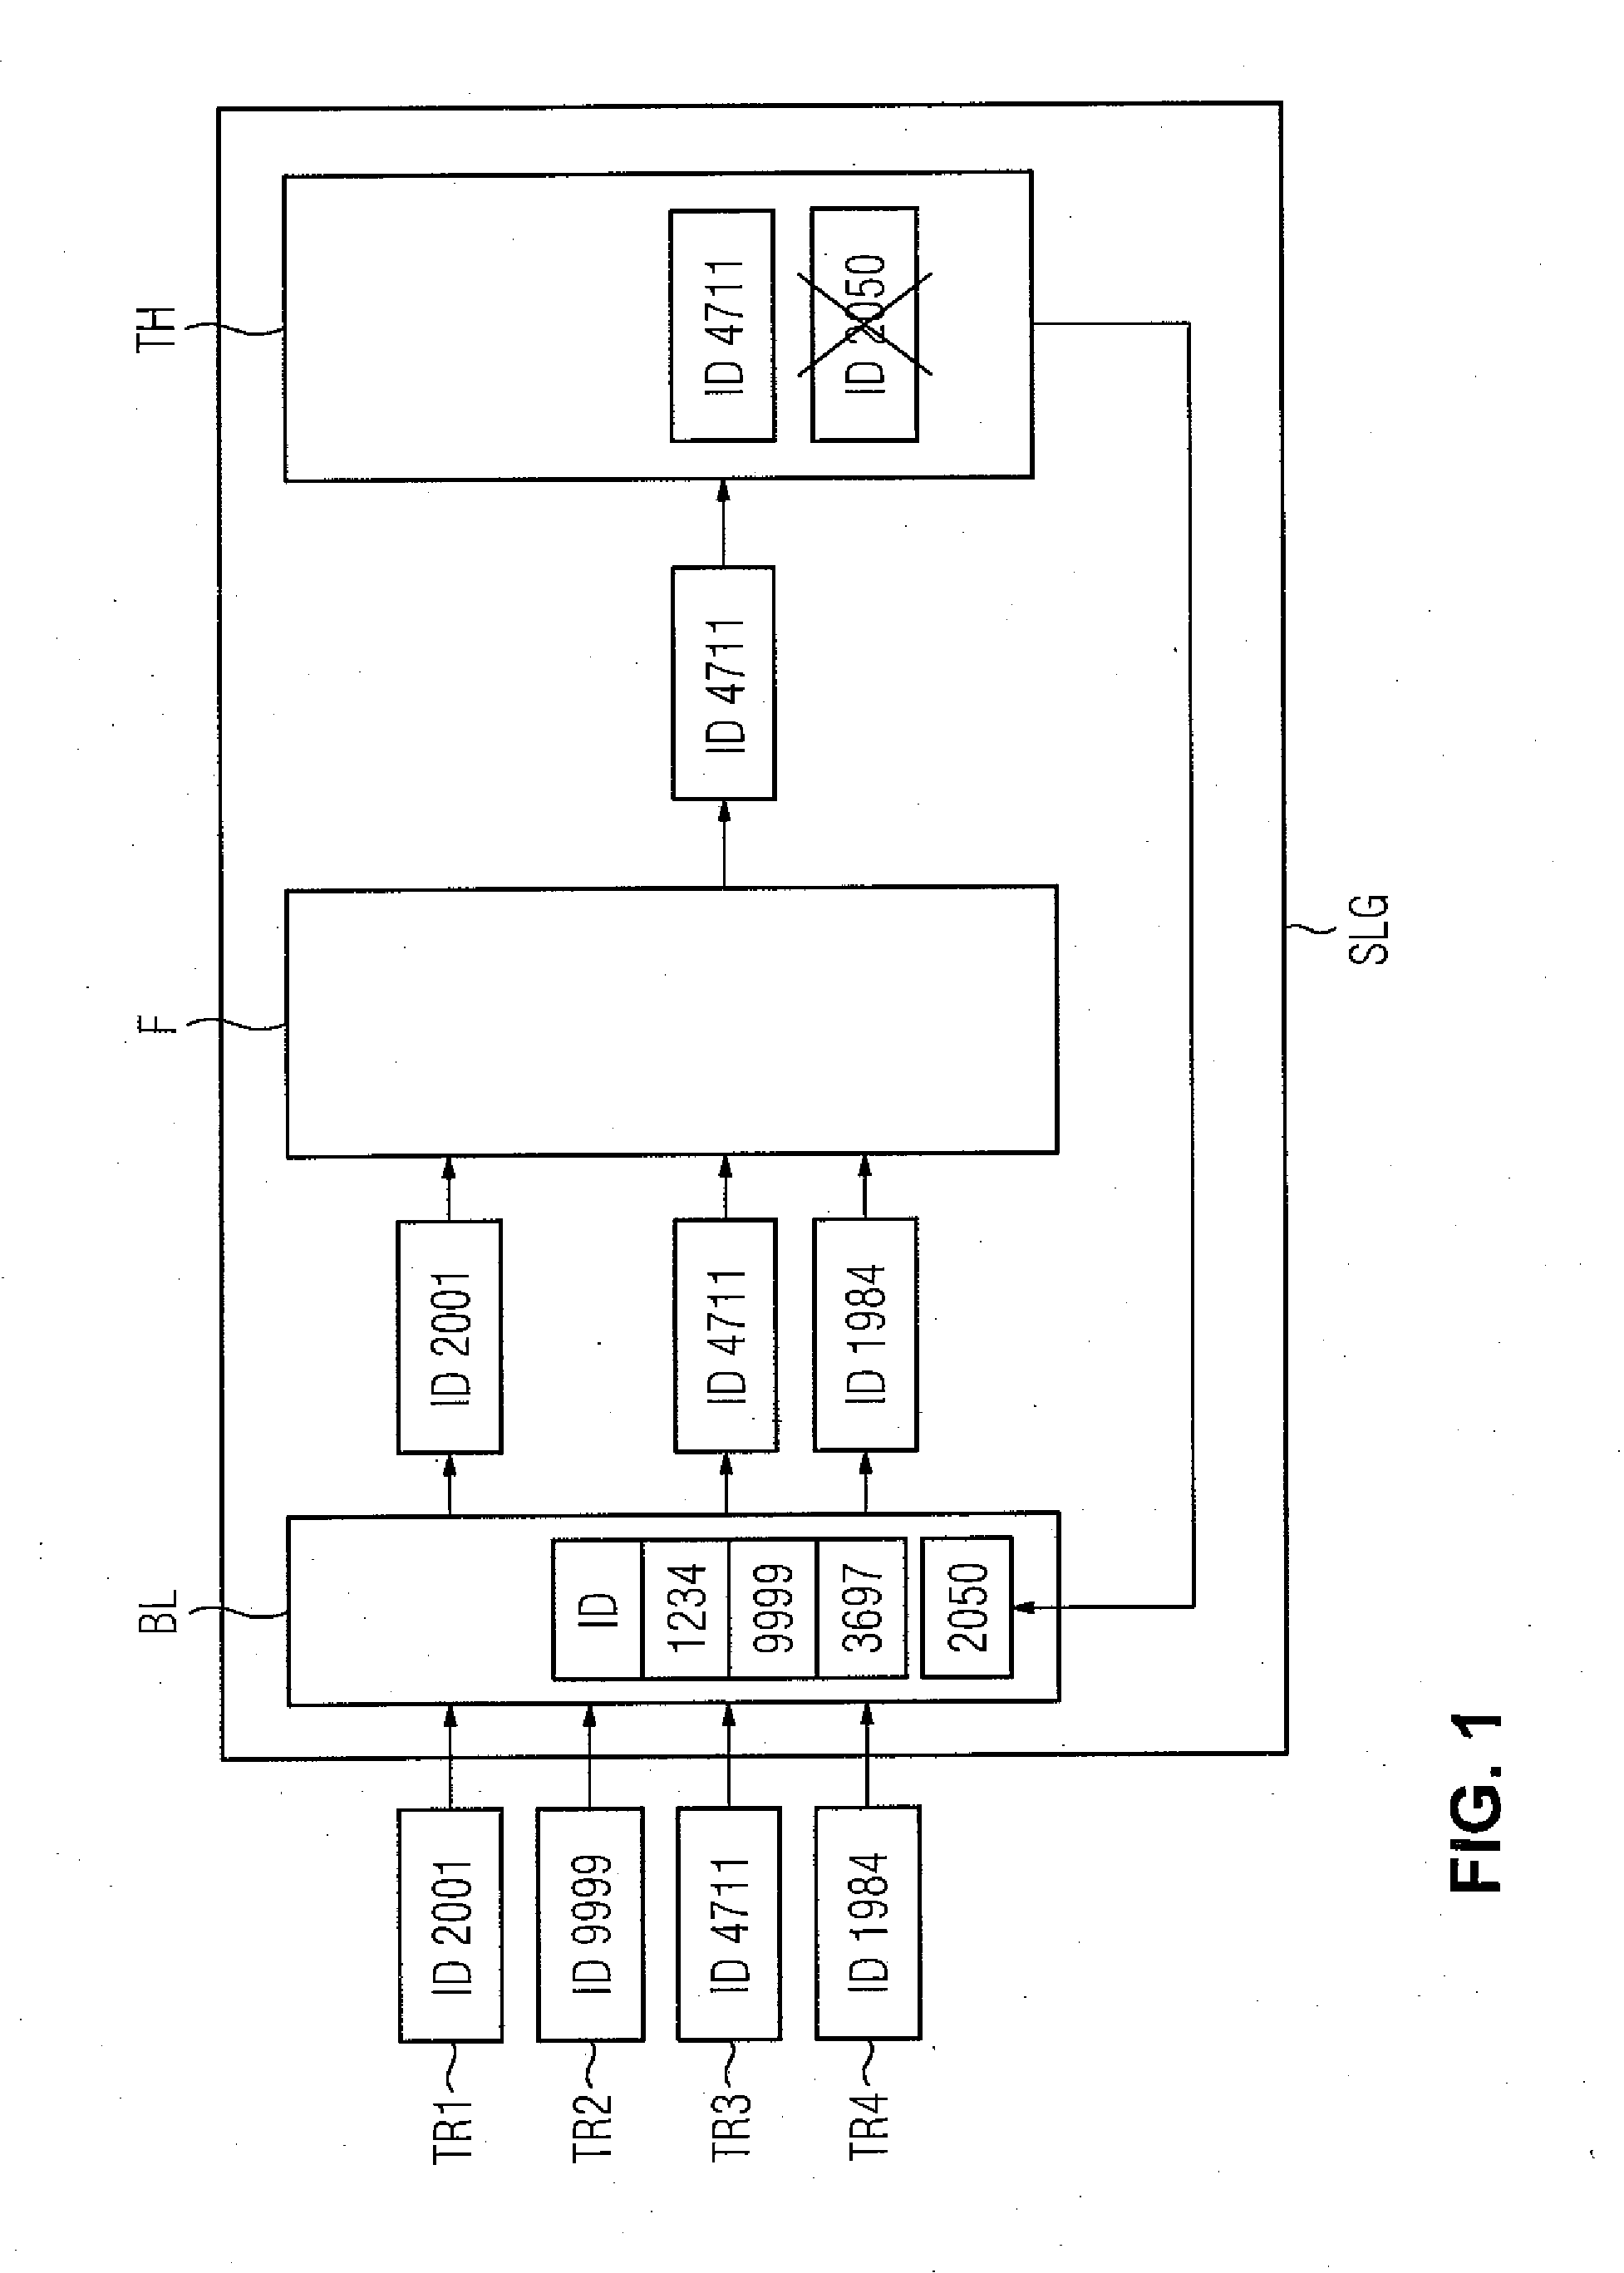 Method of Implementing and Operating and a Read/Write Unit for a System with Multiple Contactlessly Readable Transponders